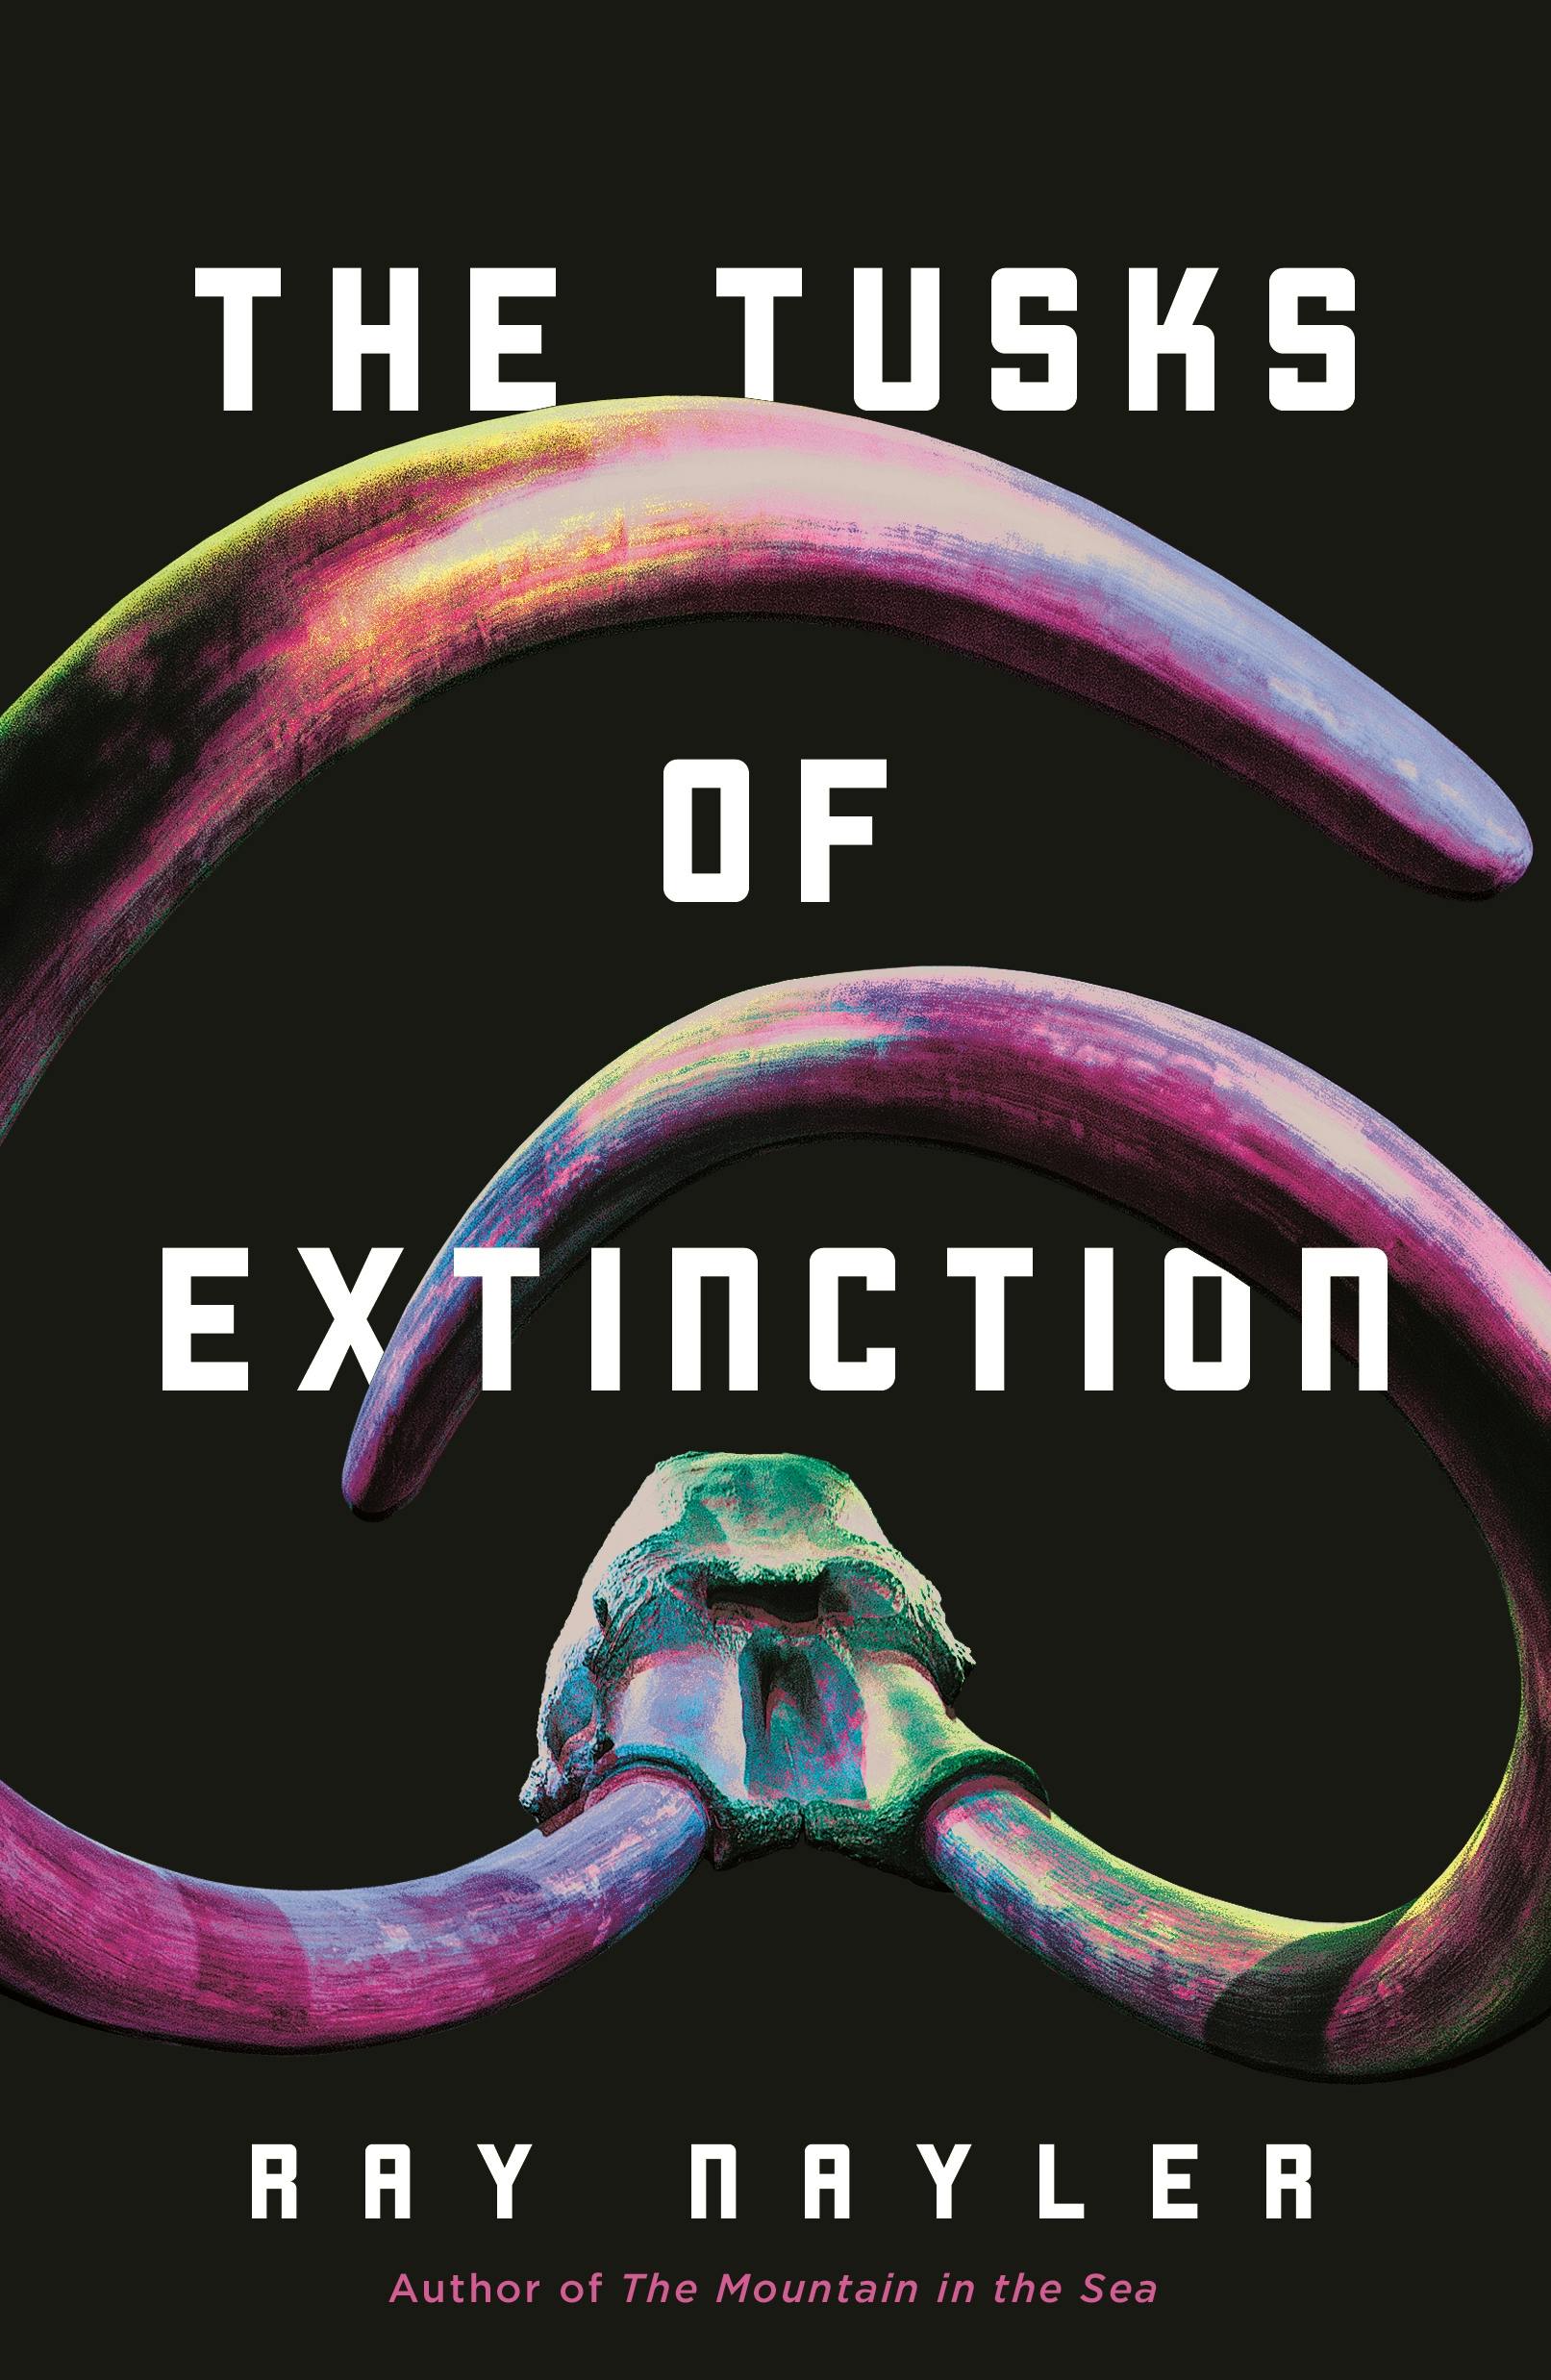 Cover for the book titled as: The Tusks of Extinction